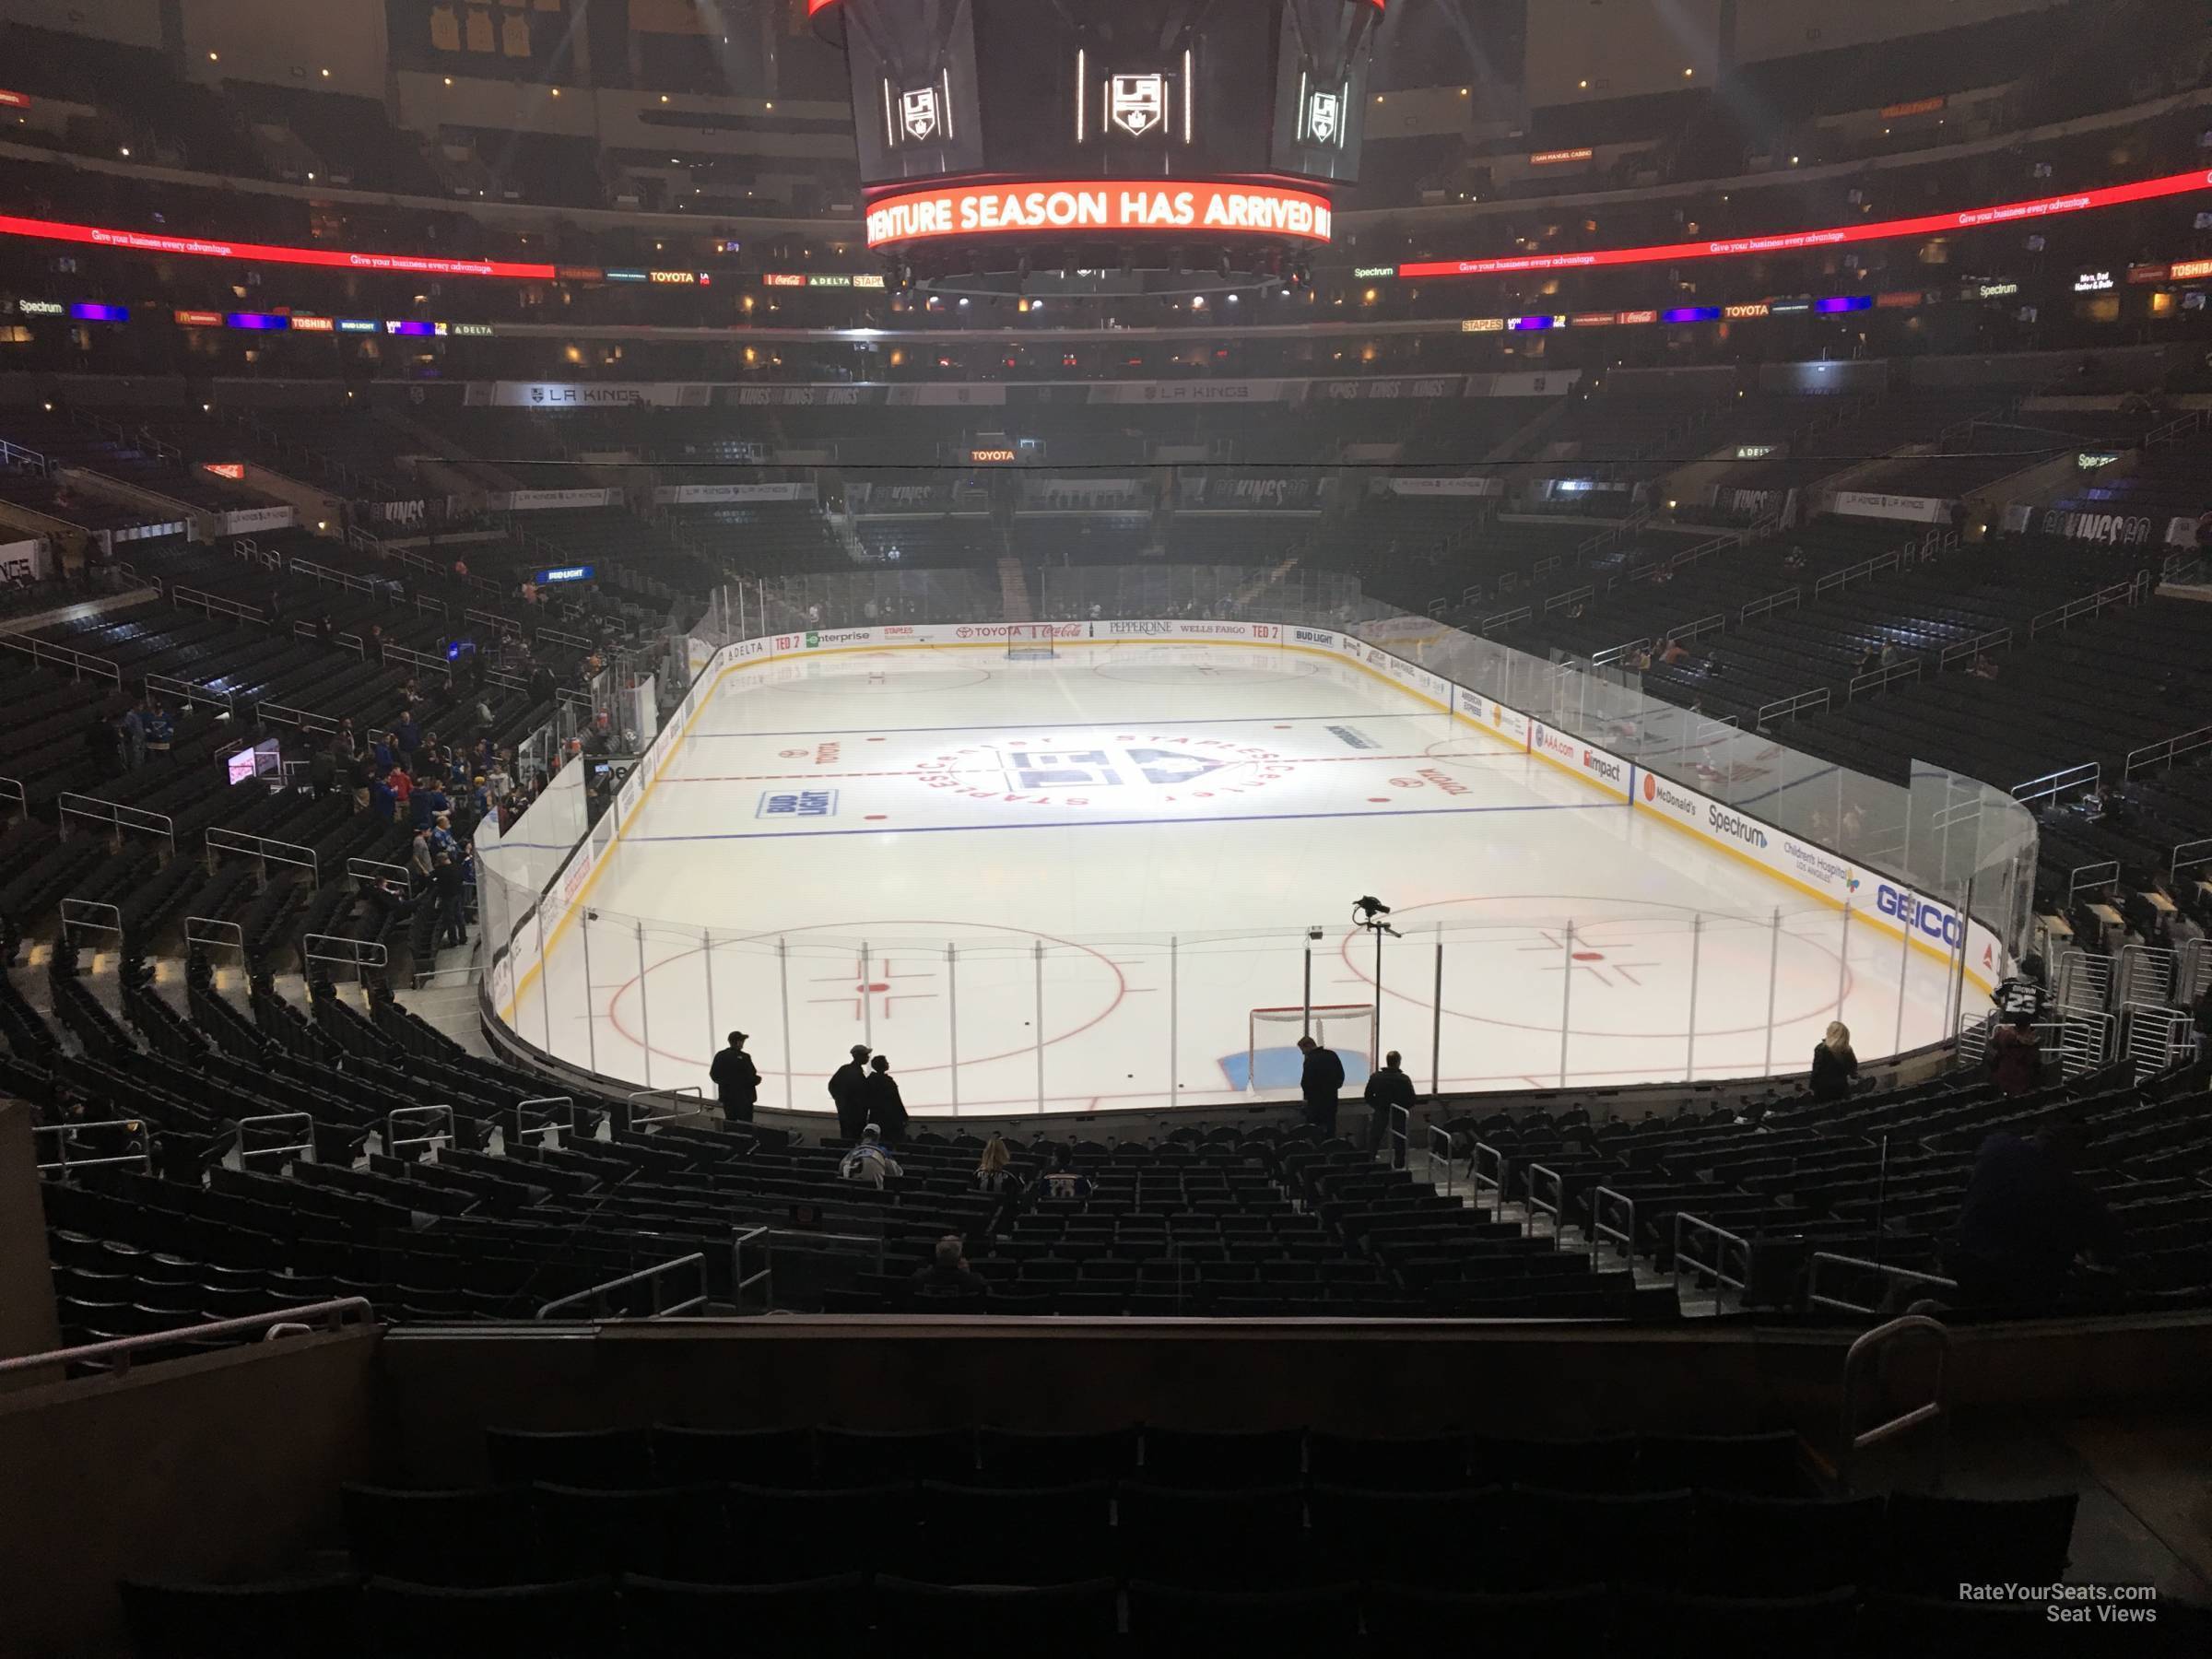 section 217, row 6 seat view  for hockey - crypto.com arena